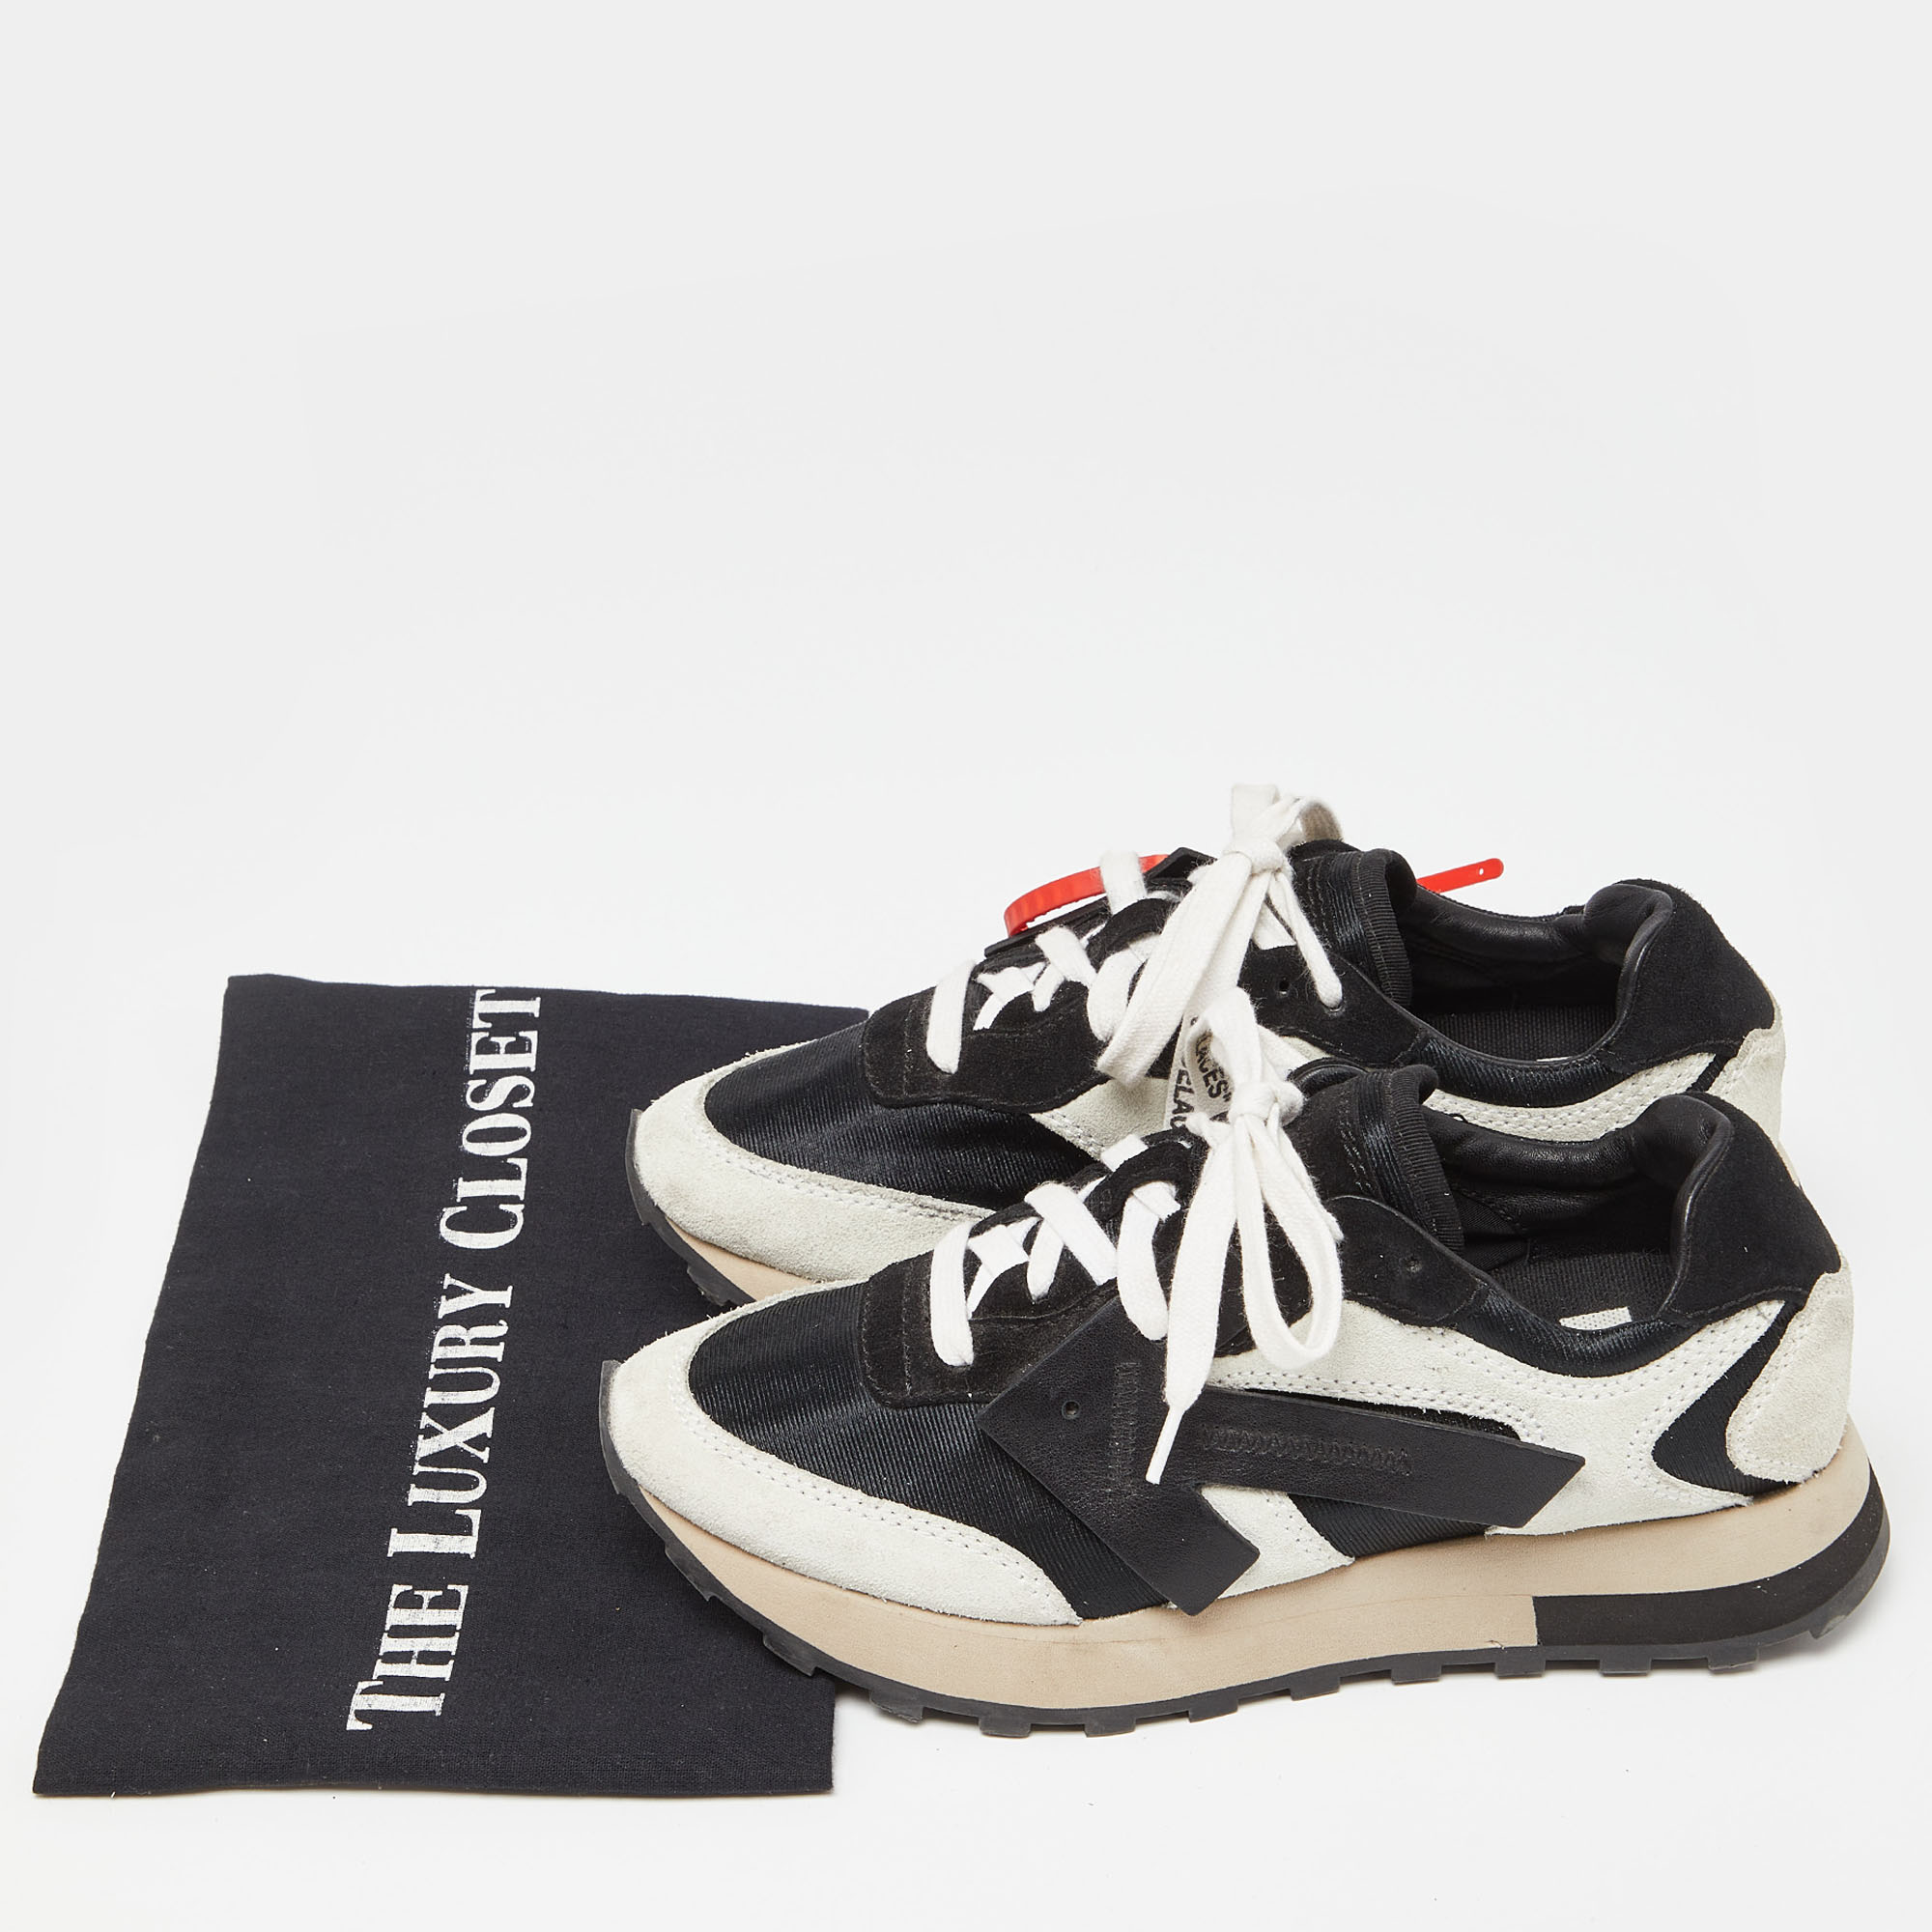 Off-White Black/Grey Suede And Fabric Arrow HG Runner Sneakers Size 36